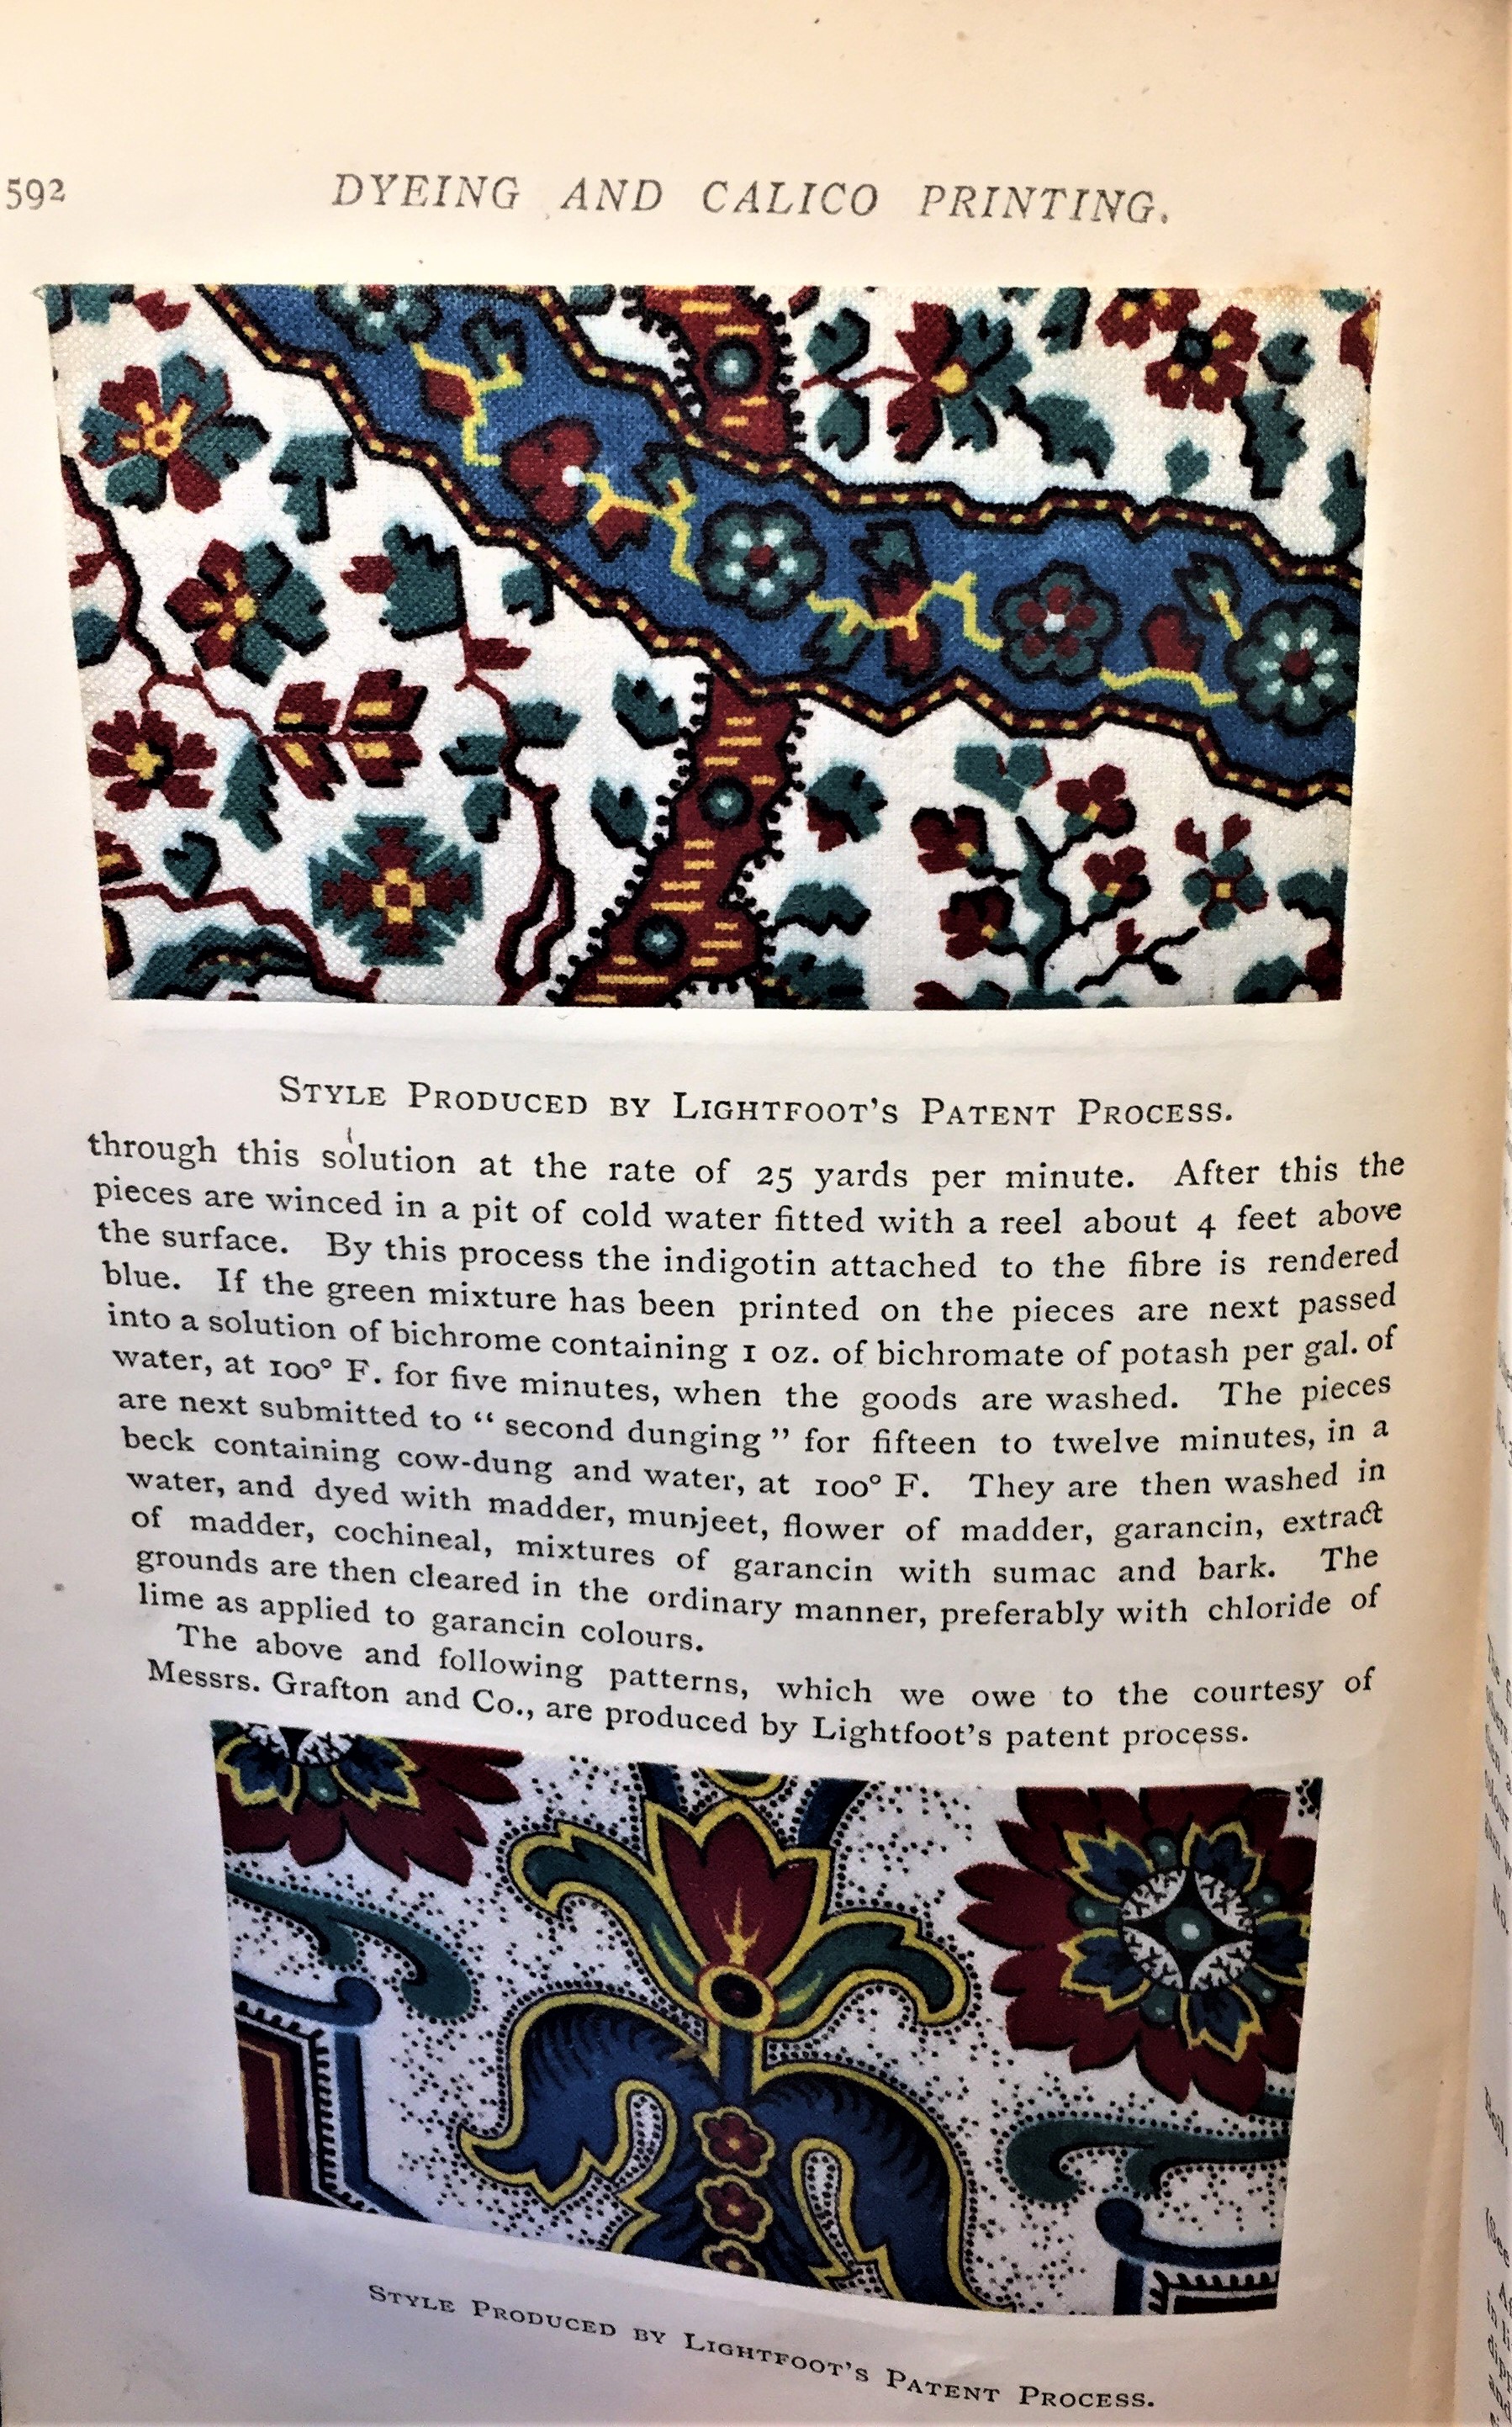 Practical Handbook of Dyeing and Calico Printing by CROOKES William: Very Good Hardcover (1874) 1st Edition | David Rigby - Rare Textile